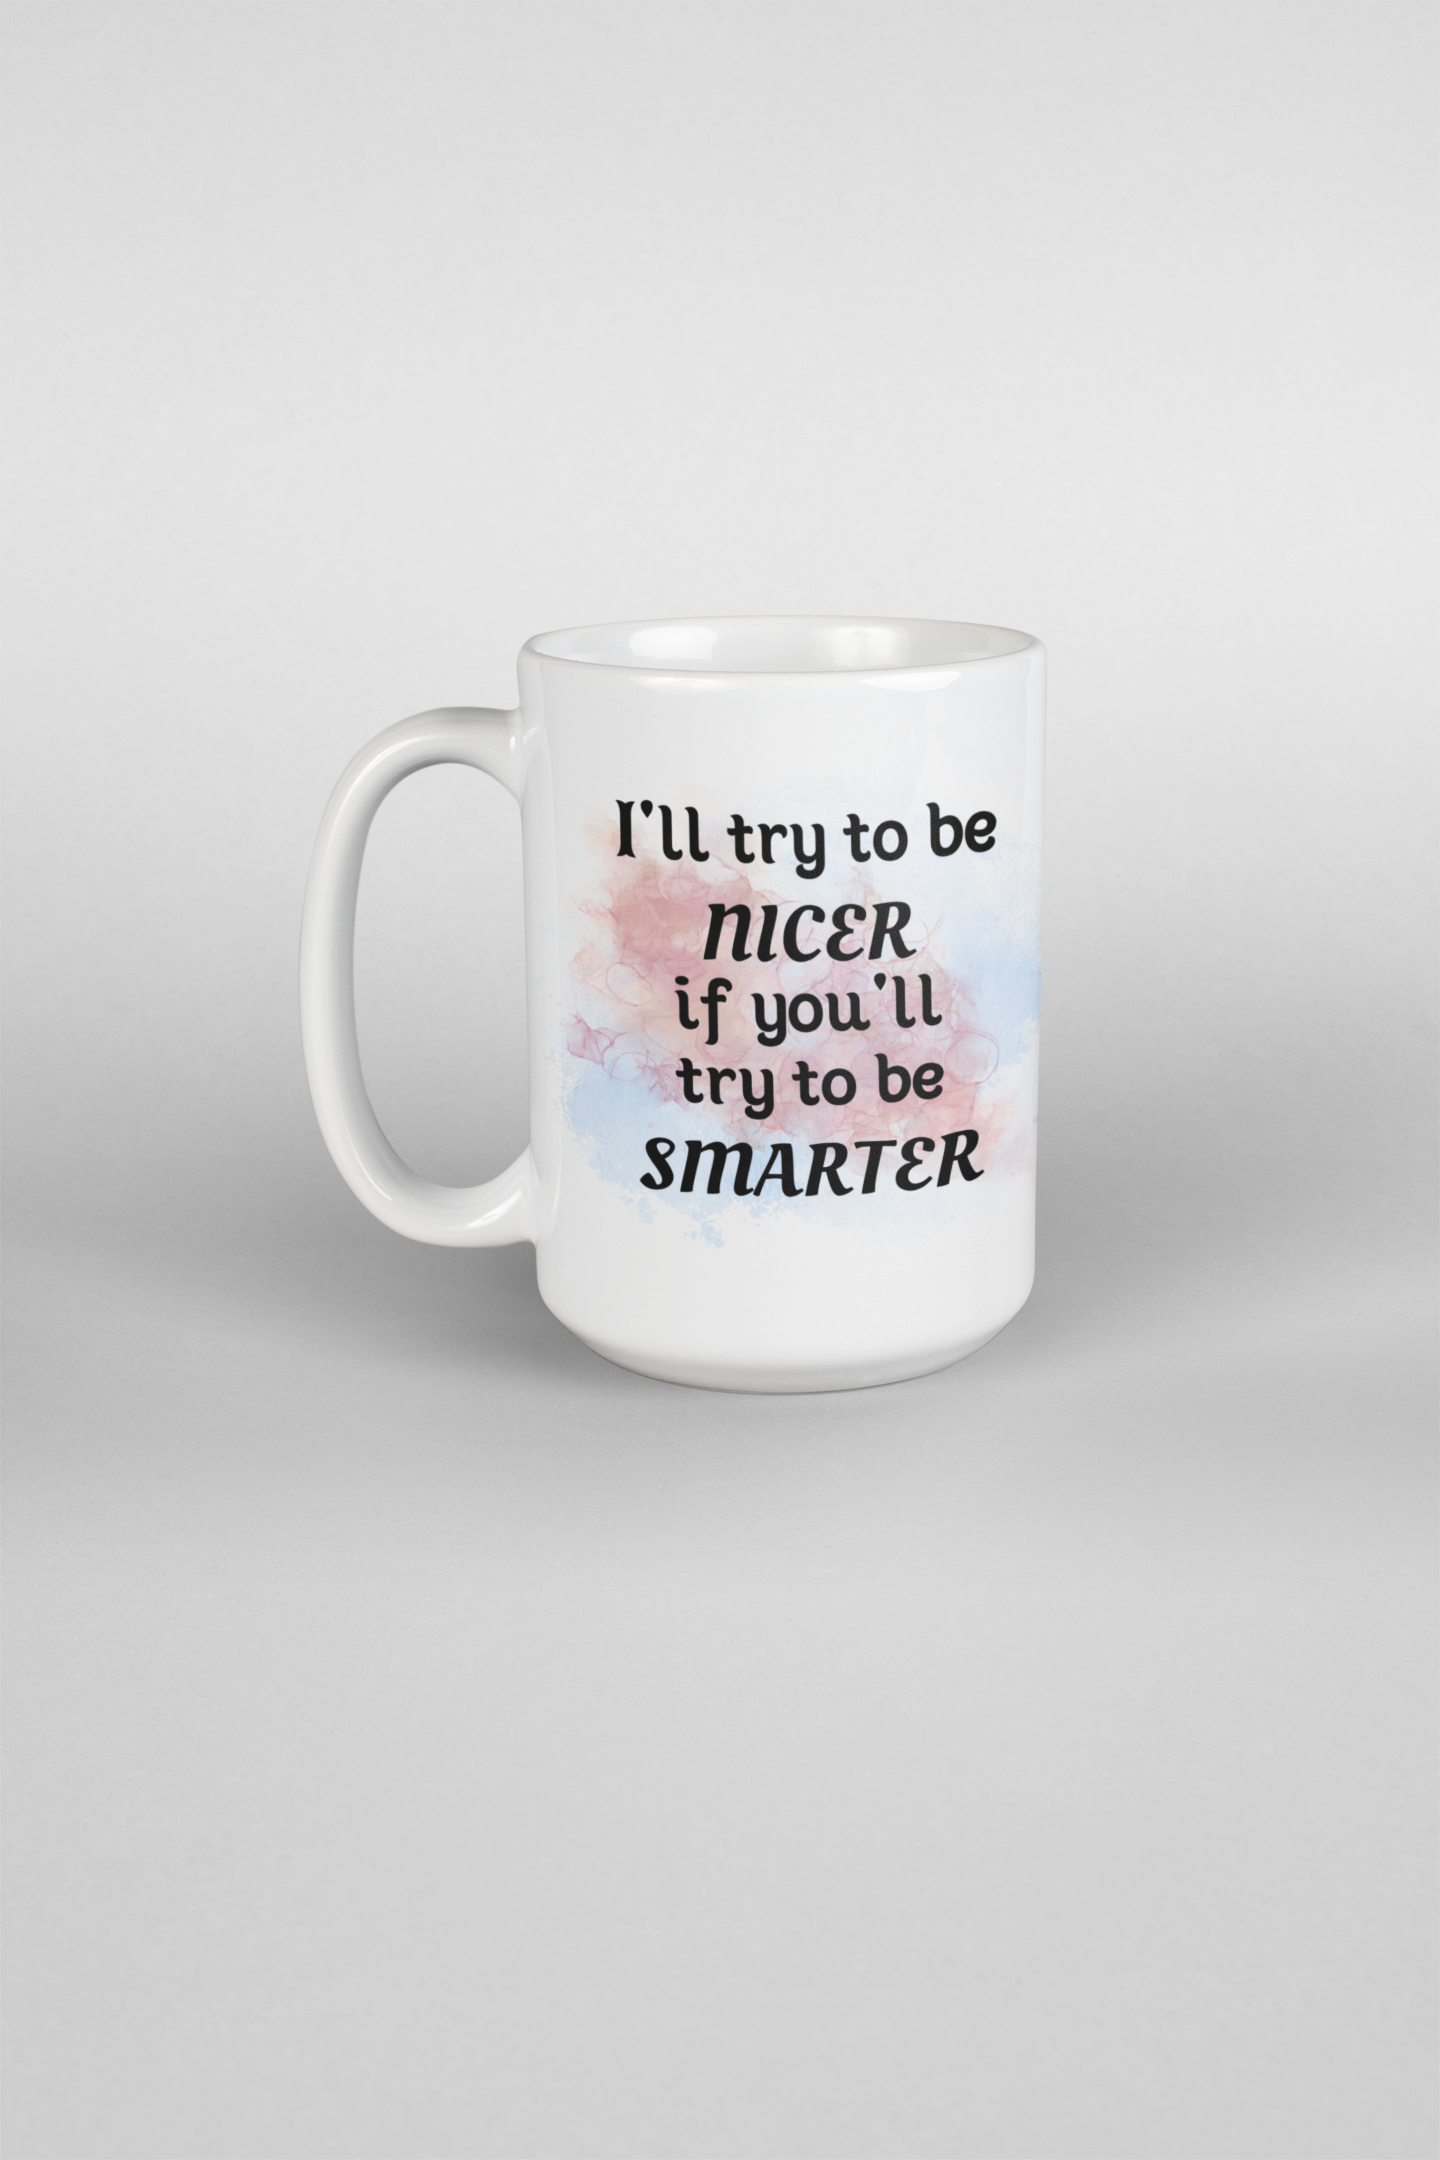 I'll try to be NICER if you try to be SMARTER - 15oz mug